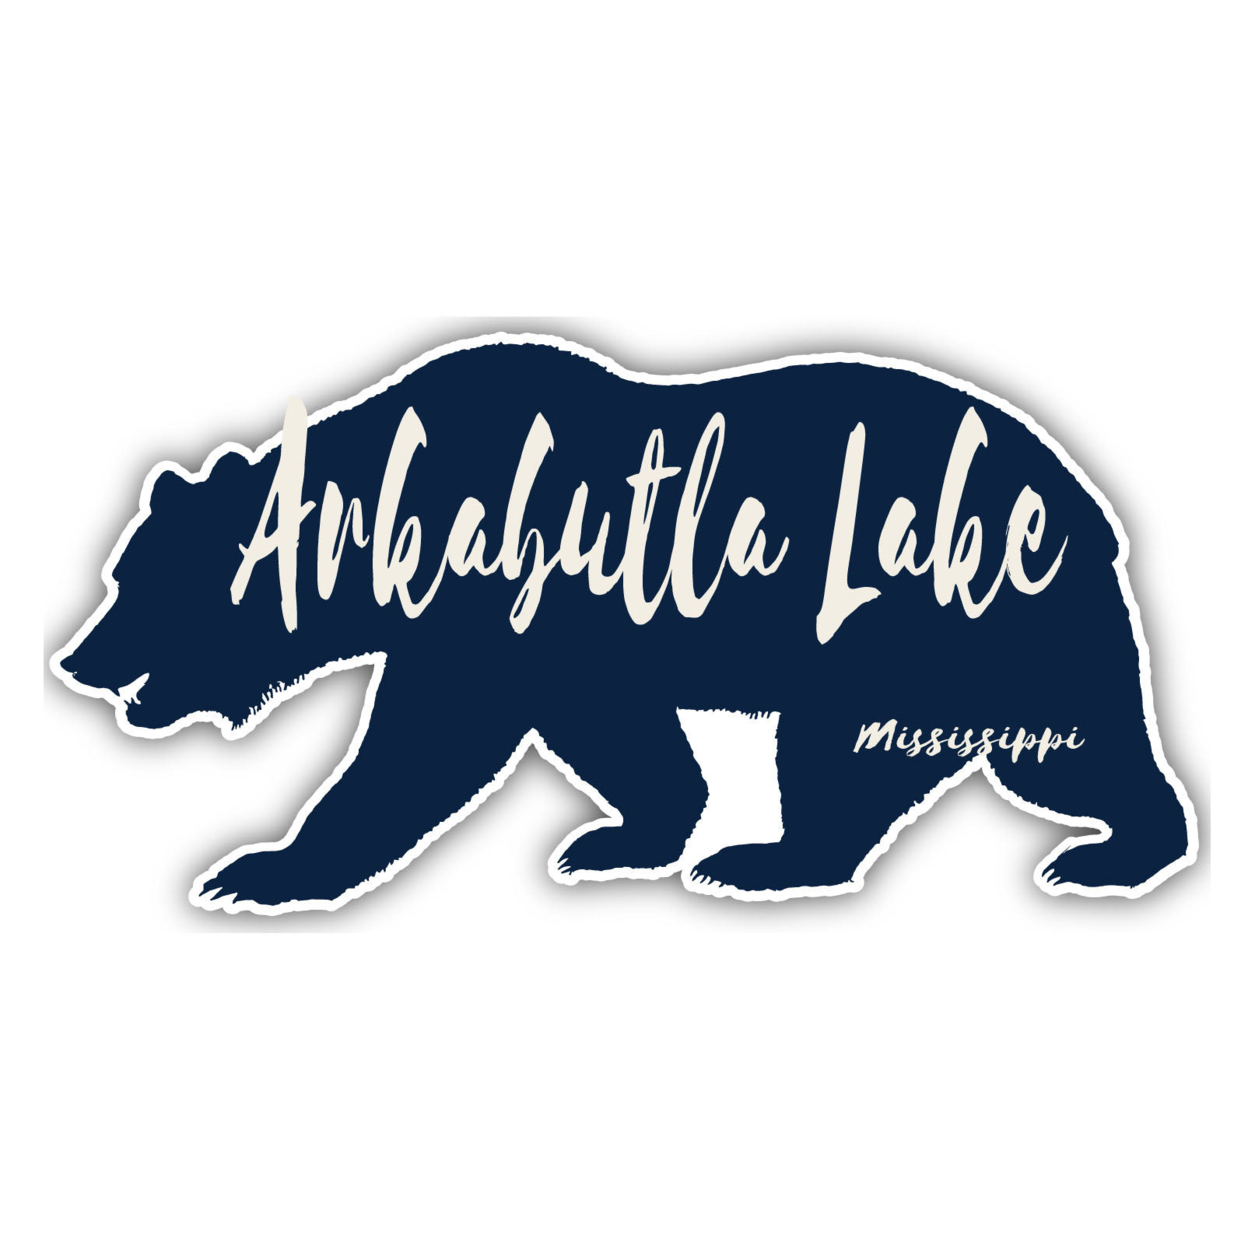 Arkabutla Lake Mississippi Souvenir Decorative Stickers (Choose Theme And Size) - 4-Pack, 12-Inch, Bear